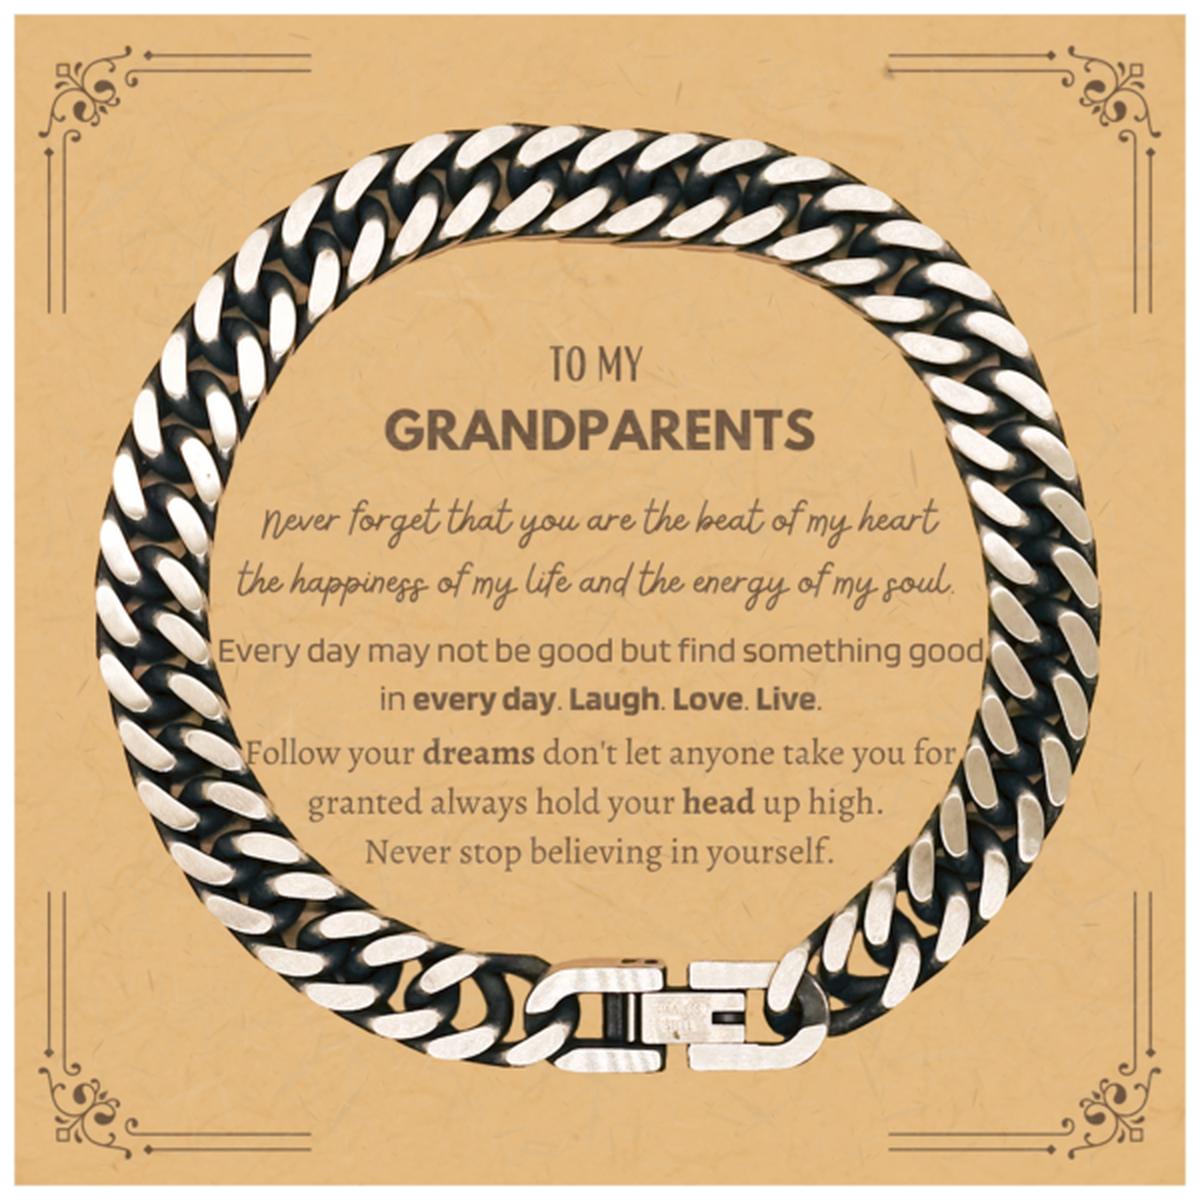 To My Grandparents Message Card Gifts, Christmas Grandparents Cuban Link Chain Bracelet Present, Birthday Unique Motivational For Grandparents, To My Grandparents Never forget that you are the beat of my heart the happiness of my life and the energy of my